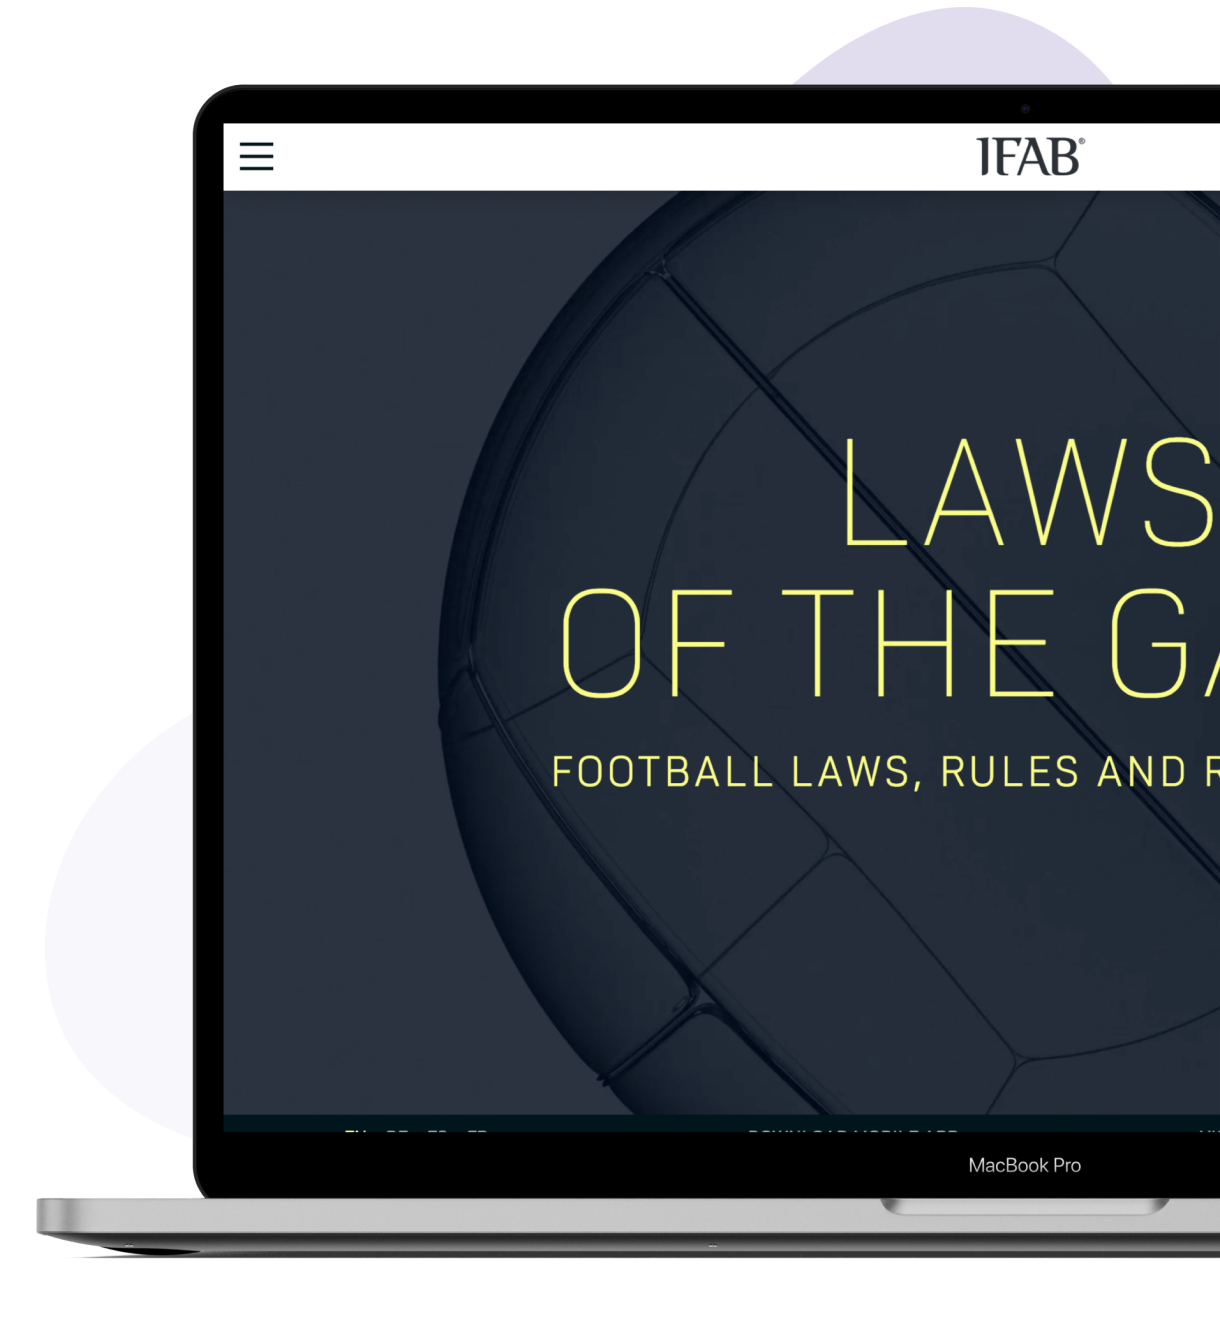 website for football law-makers